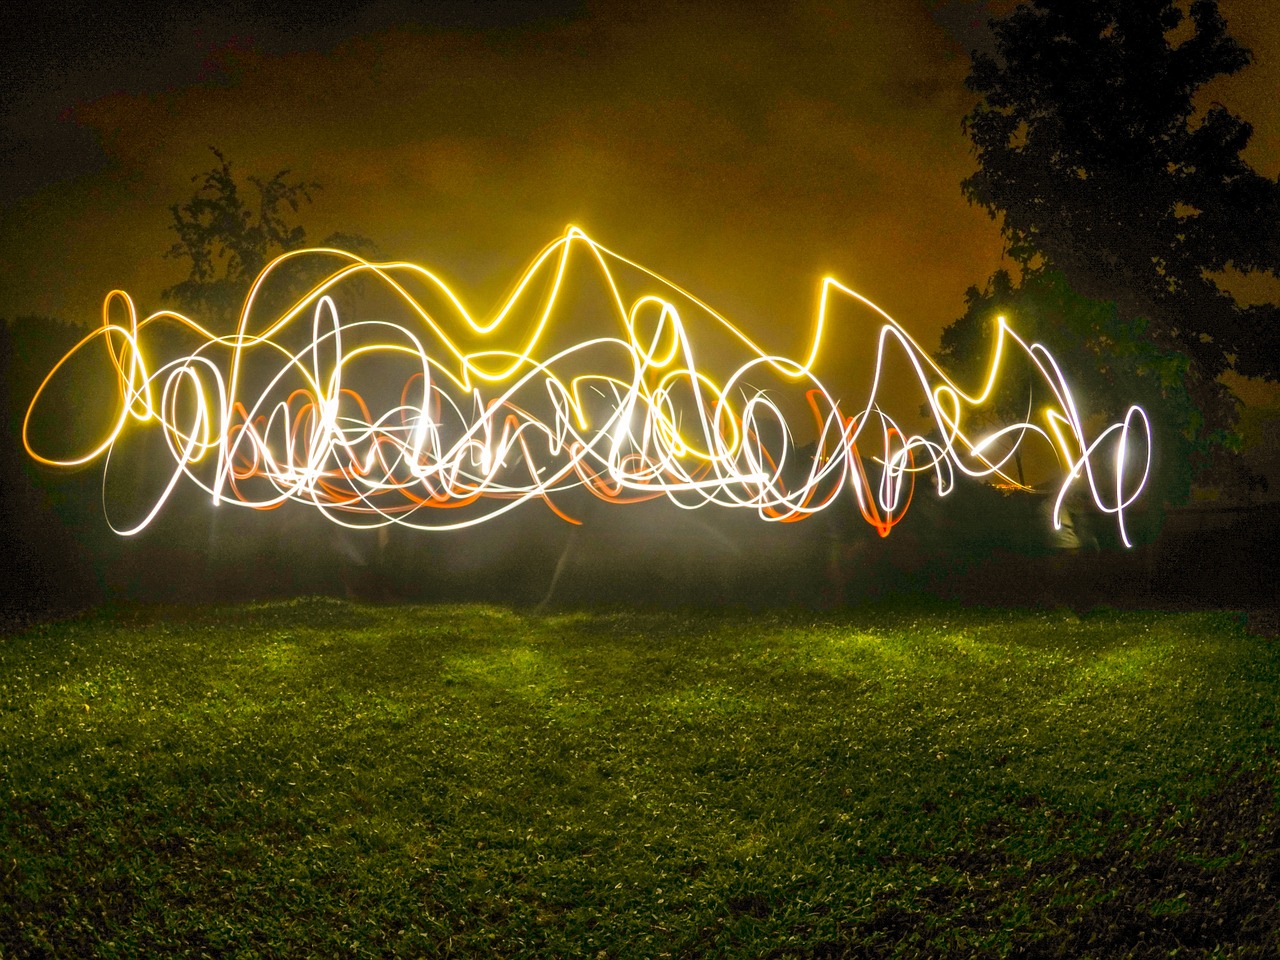 Light Trails in Nature: Adding Drama to Landscape Photography